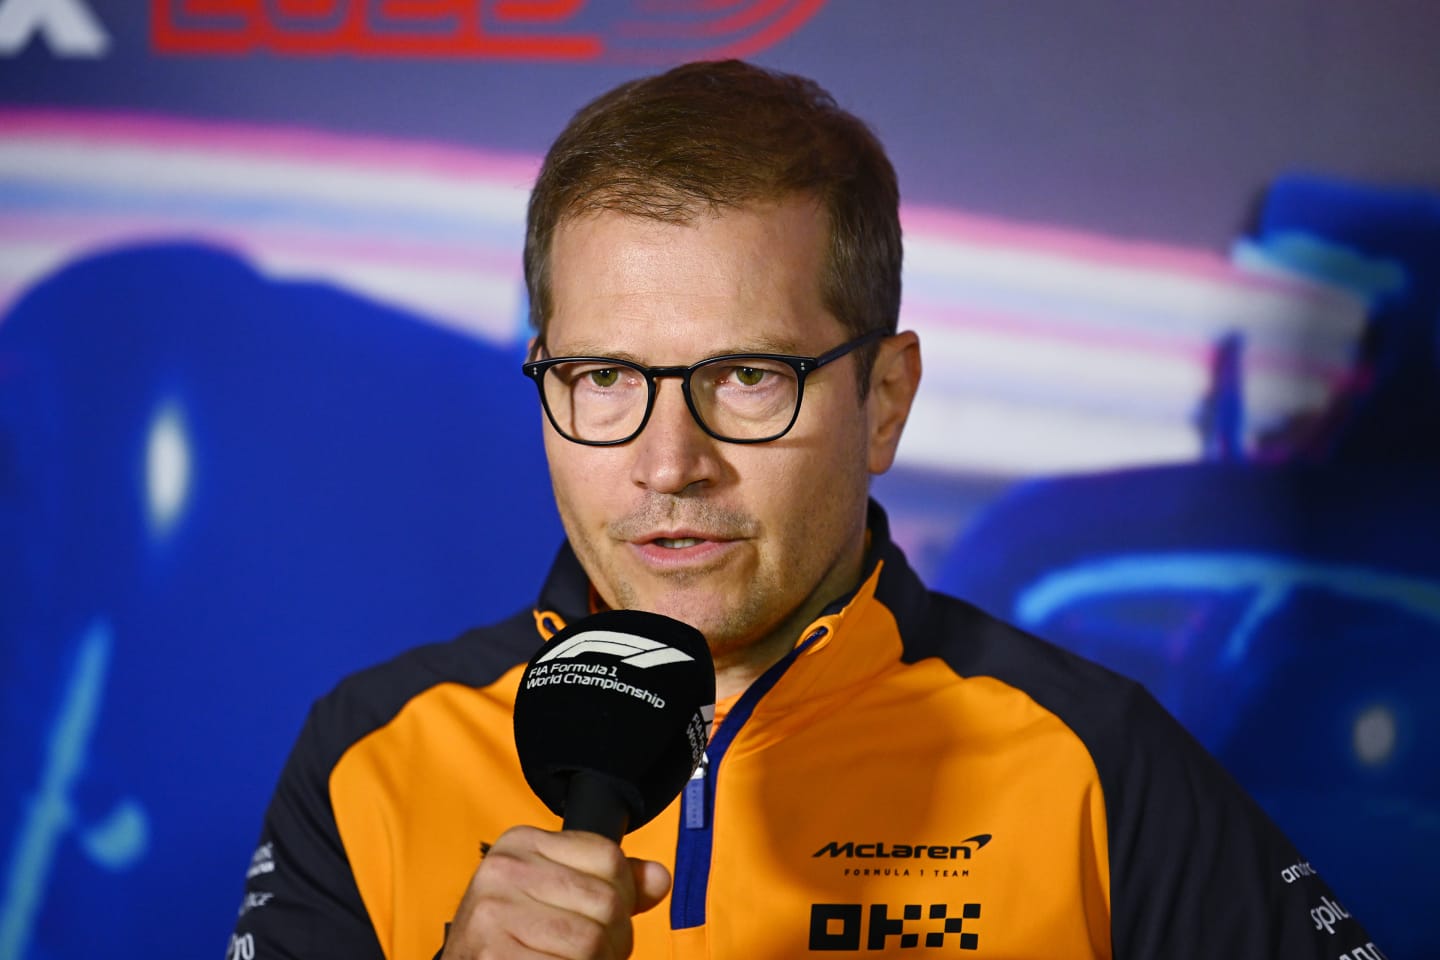 ZANDVOORT, NETHERLANDS - SEPTEMBER 03: McLaren Team Principal Andreas Seidl attends the Team Principals Press Conference prior to final practice ahead of the F1 Grand Prix of The Netherlands at Circuit Zandvoort on September 03, 2022 in Zandvoort, Netherlands. (Photo by Clive Mason/Getty Images)